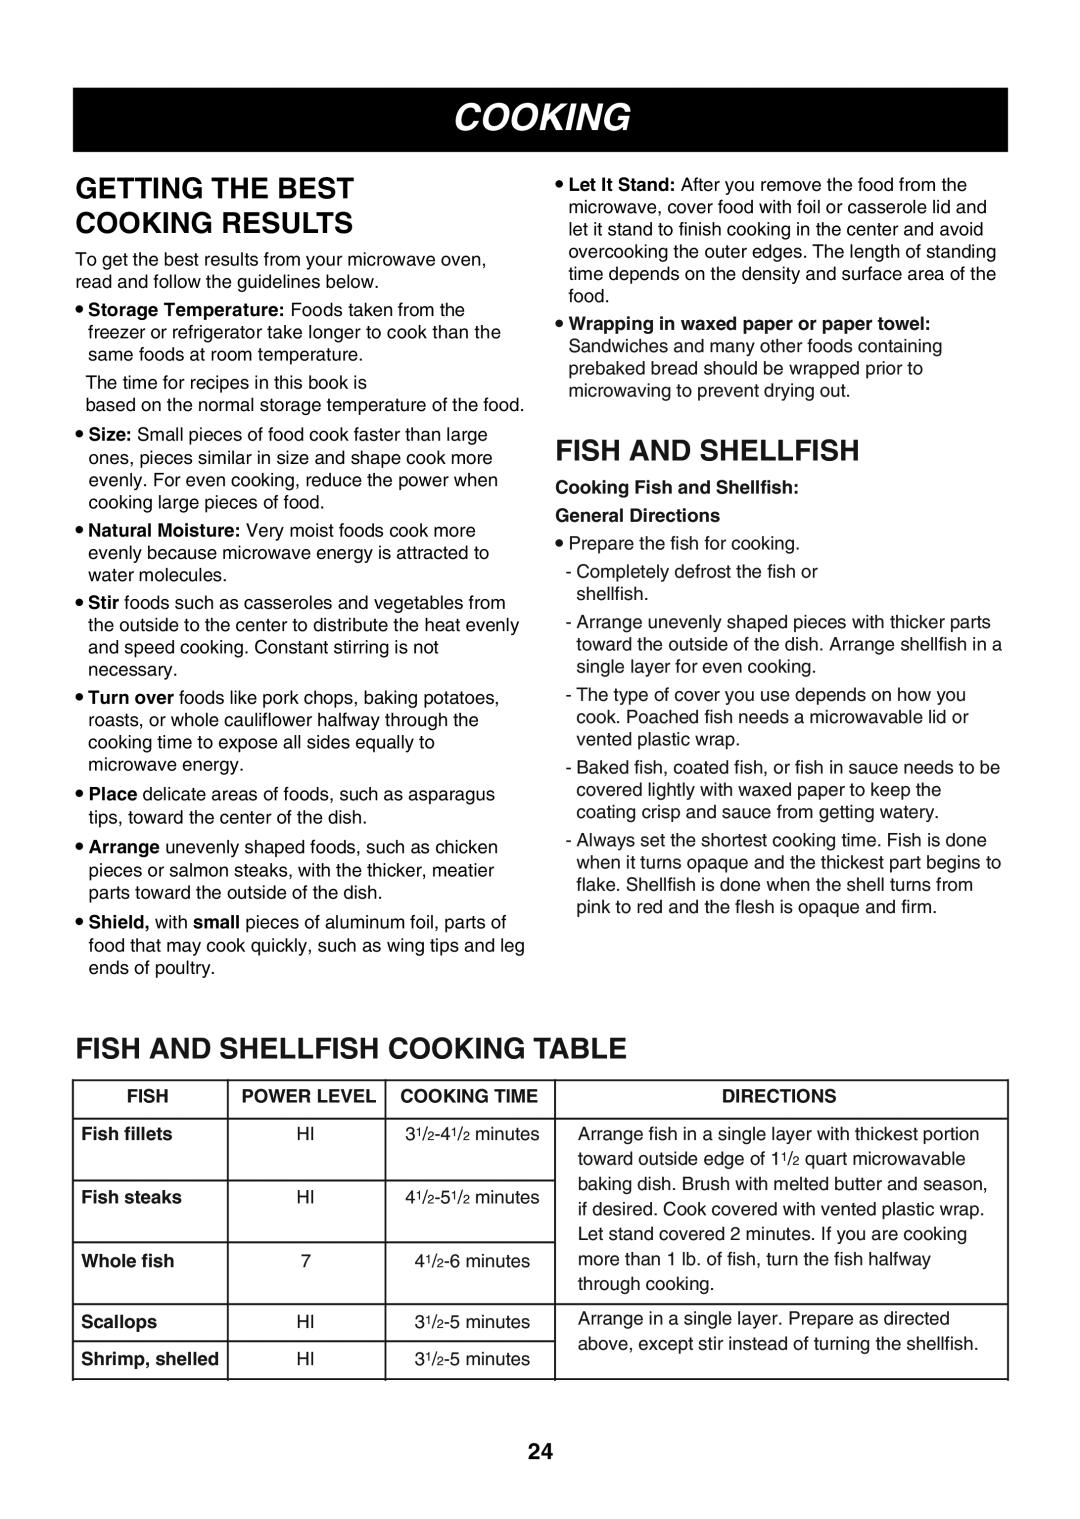 LG Electronics LMVM2075SW, LMVM2075ST Getting The Best Cooking Results, Fish And Shellfish Cooking Table 